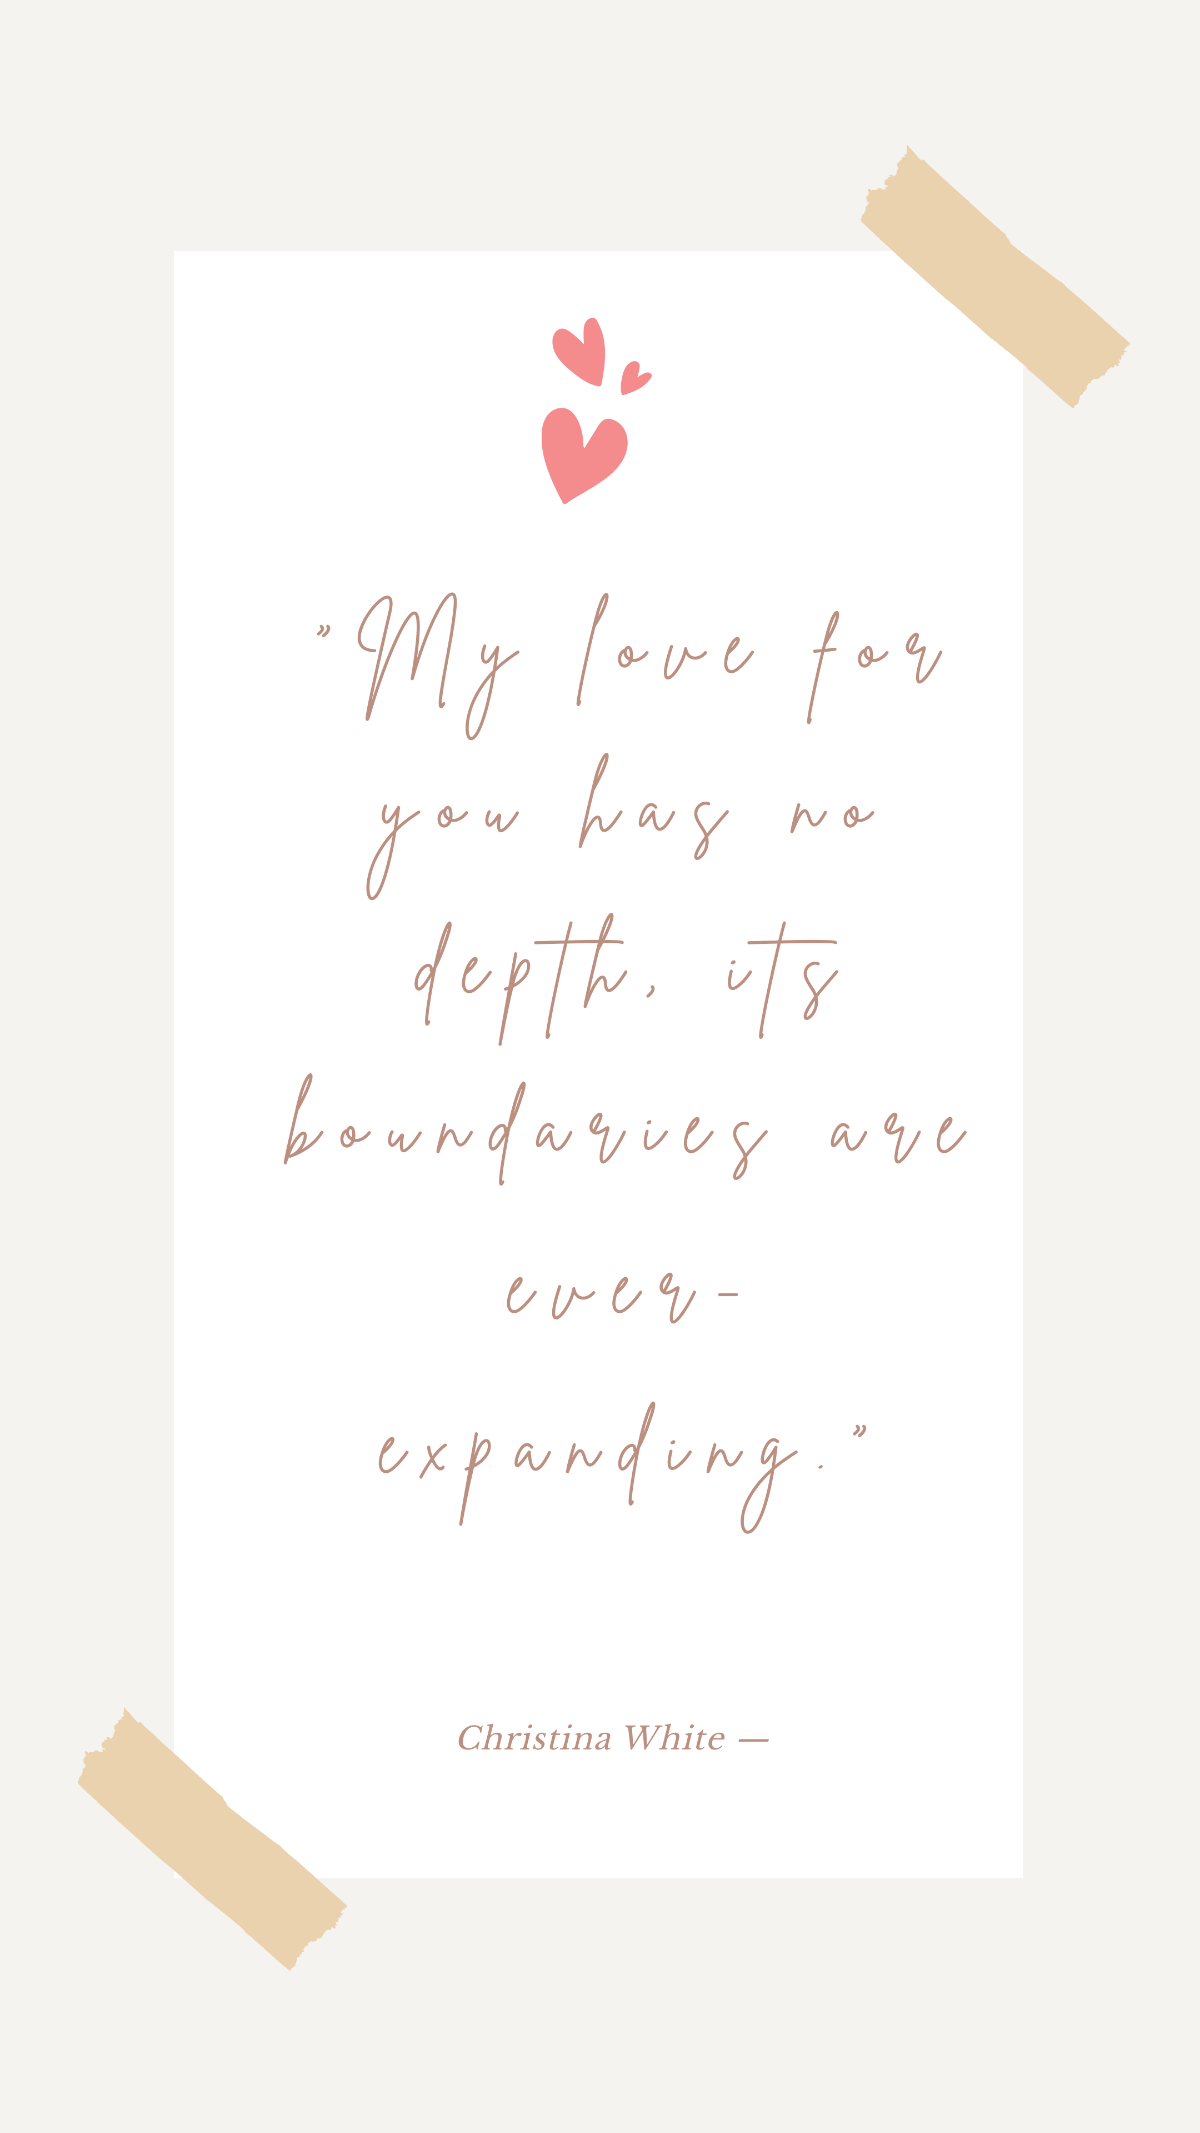 Christina White — “My love for you has no depth, its boundaries are ever-expanding.” Template